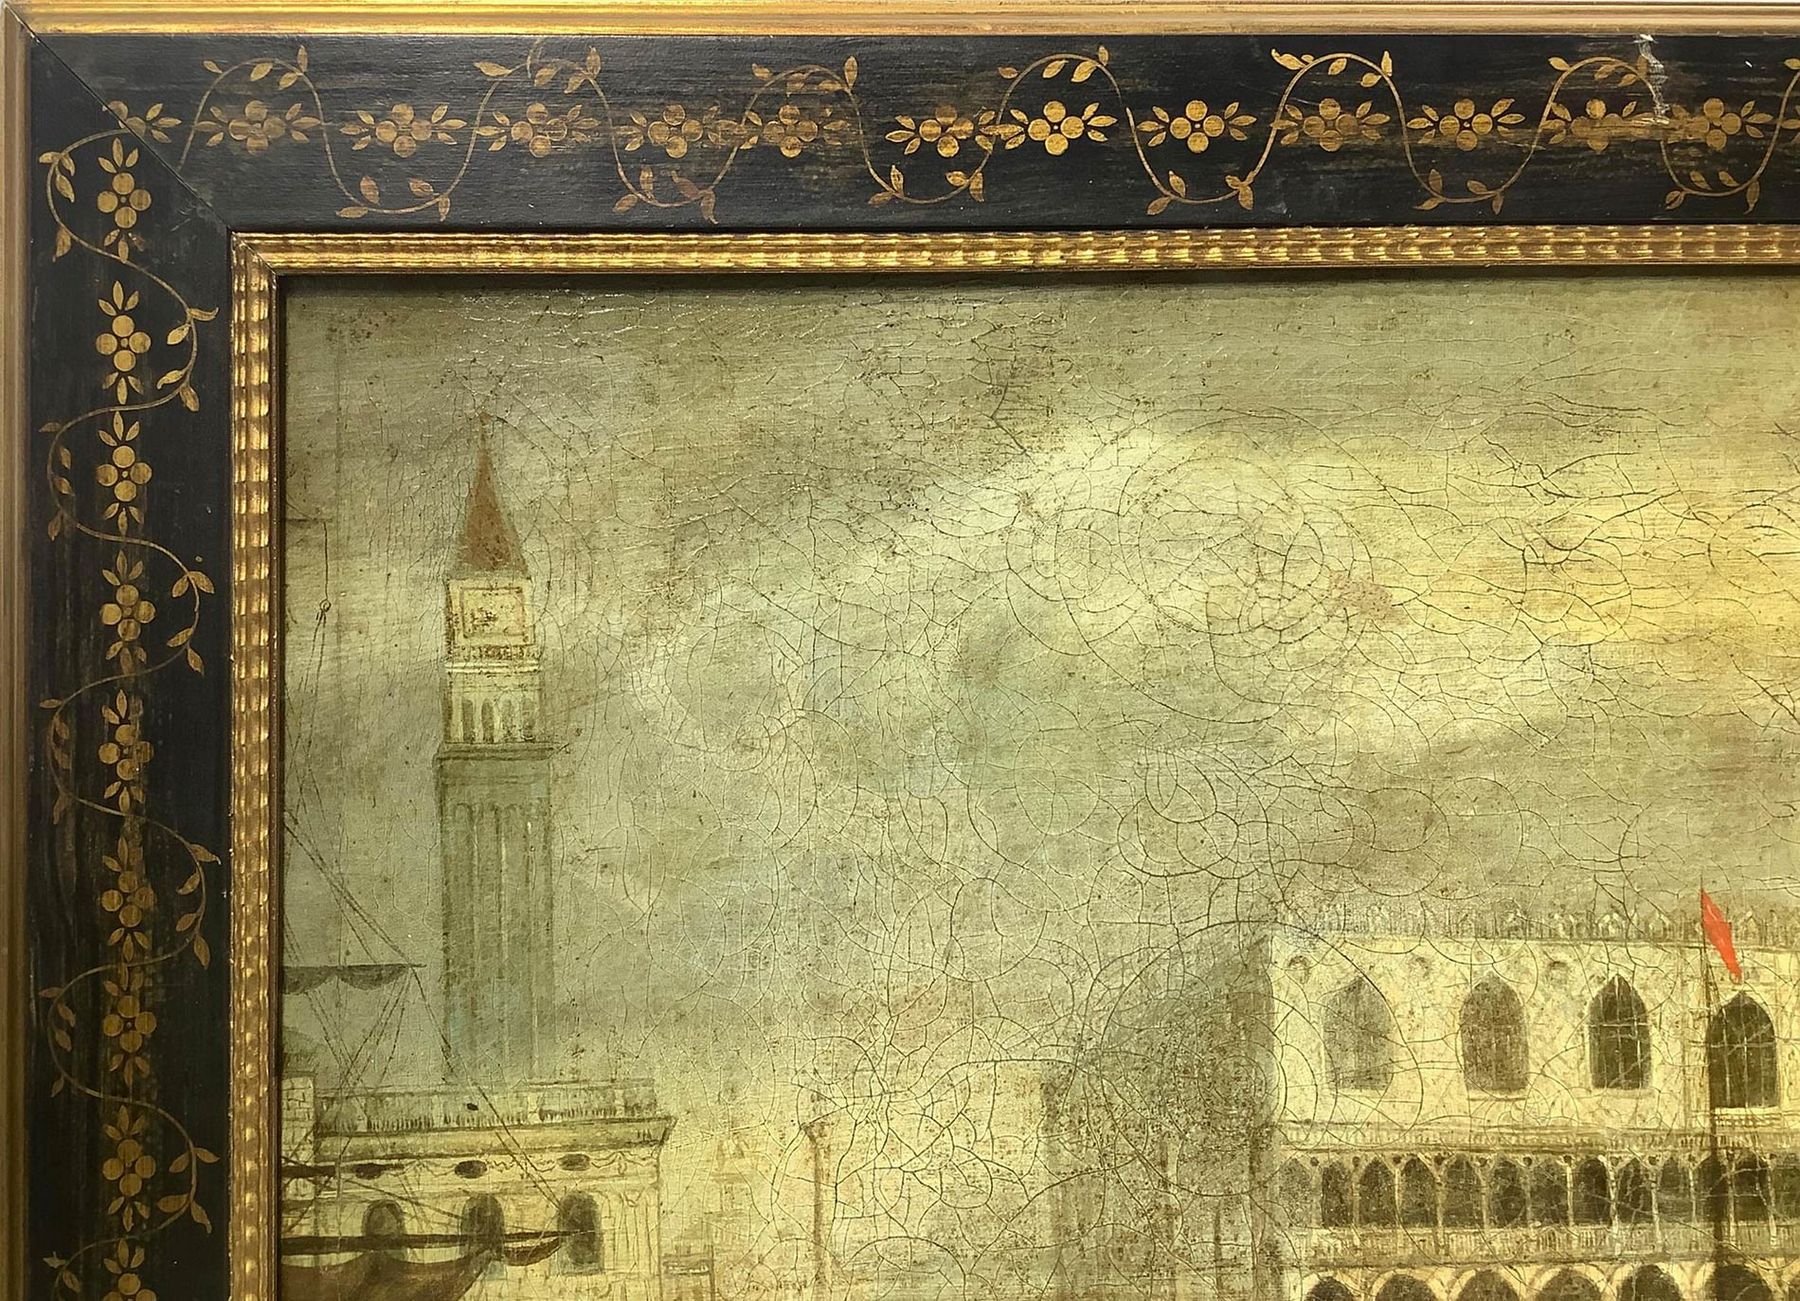 Oil painting on canvas depicting the Doge's Palace in Venice, seventeenth / eighteenth century Venet - Image 2 of 6